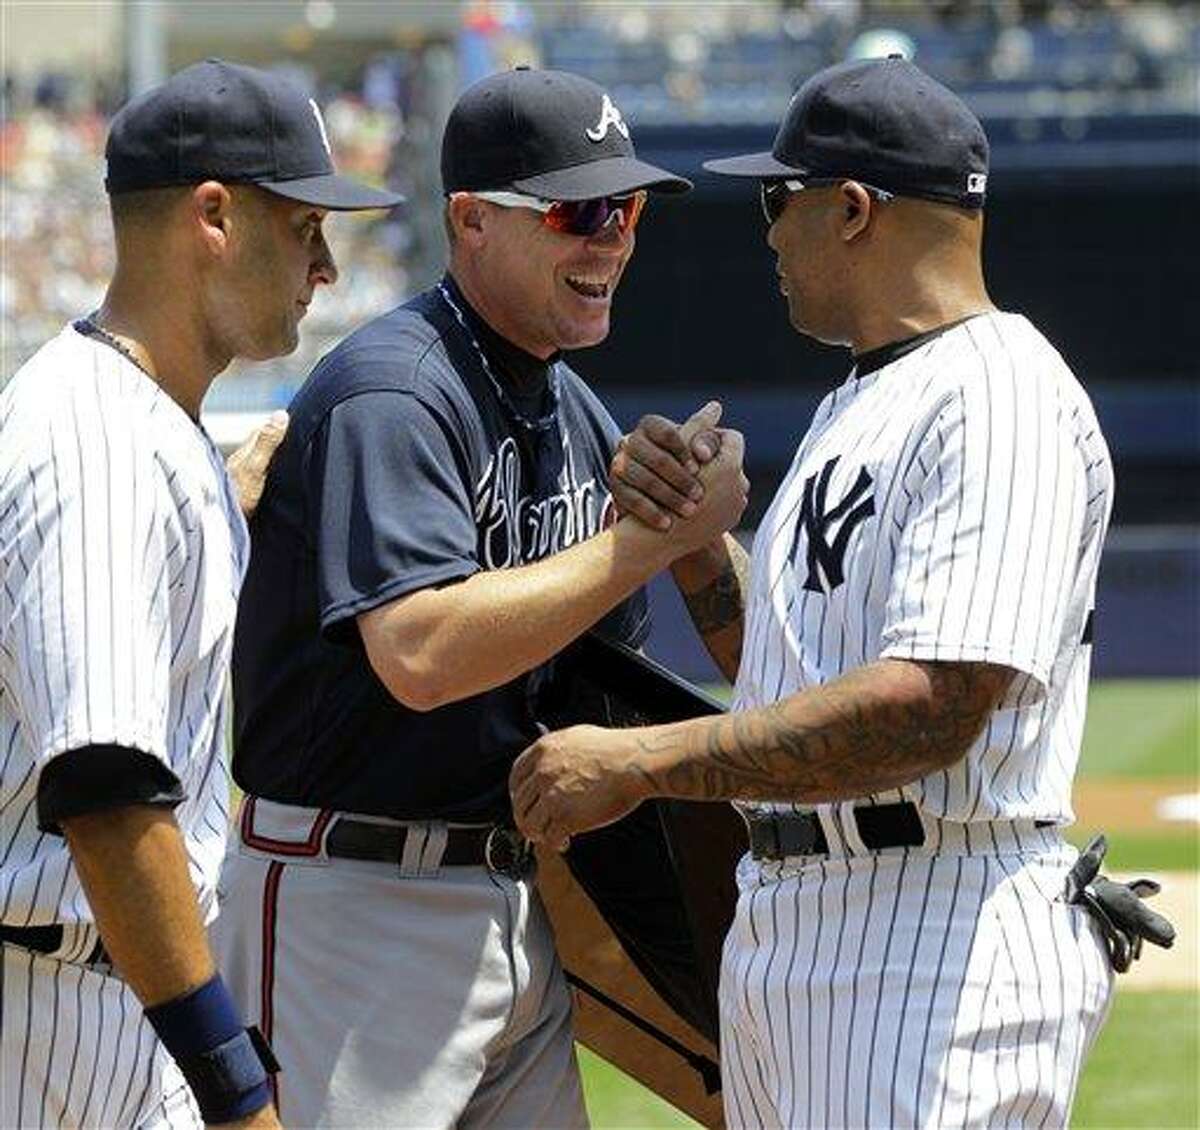 New York Yankees' Derek Jeter, left, watches as New York Yankees' Andruw Jones, right, congratulates Atlanta Braves' Chipper Jones, after presenting him with third base from Tuesday night's game, before the two teams faced off in a baseball game at Yankee Stadium in New York, Wednesday, June 20, 2012. Jones is retiring at the end of the season. (AP Photo/Kathy Willens)